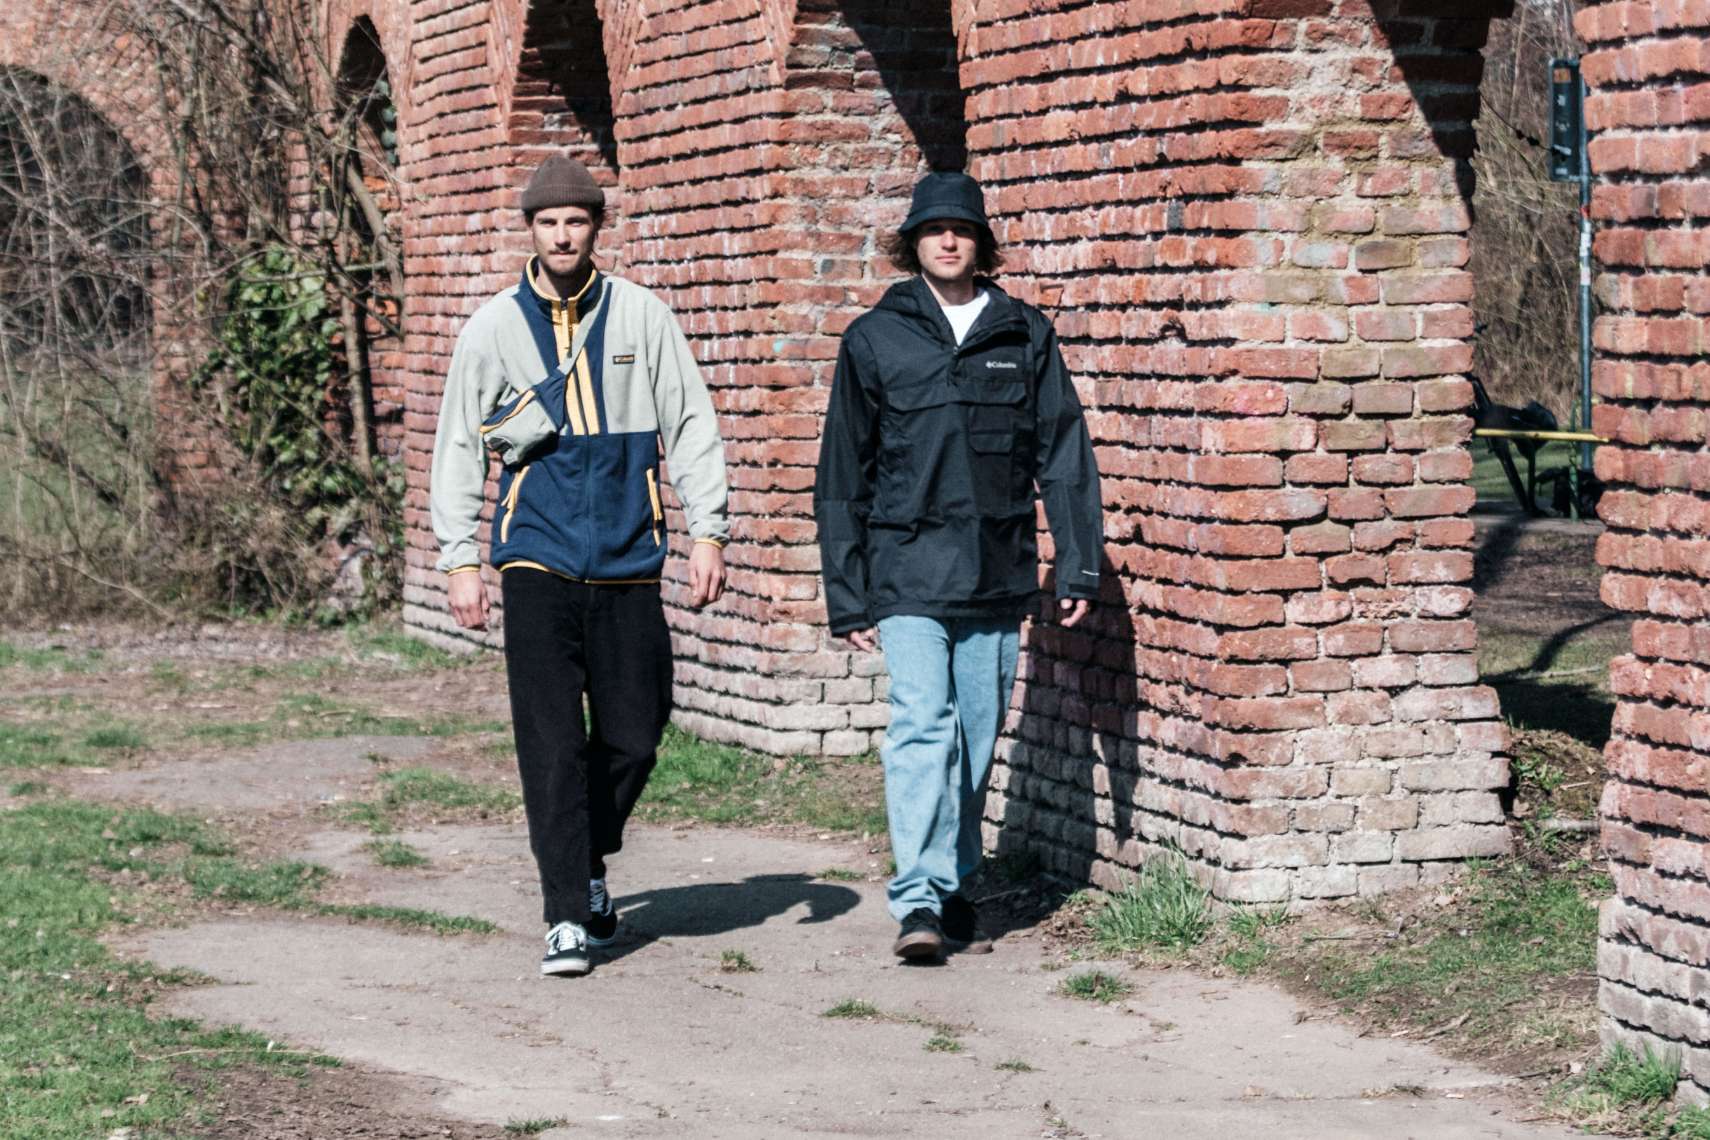 Two guys exploring the urban in the Back Bowl Lightweight sweatjacket and the Buckhollow jackets